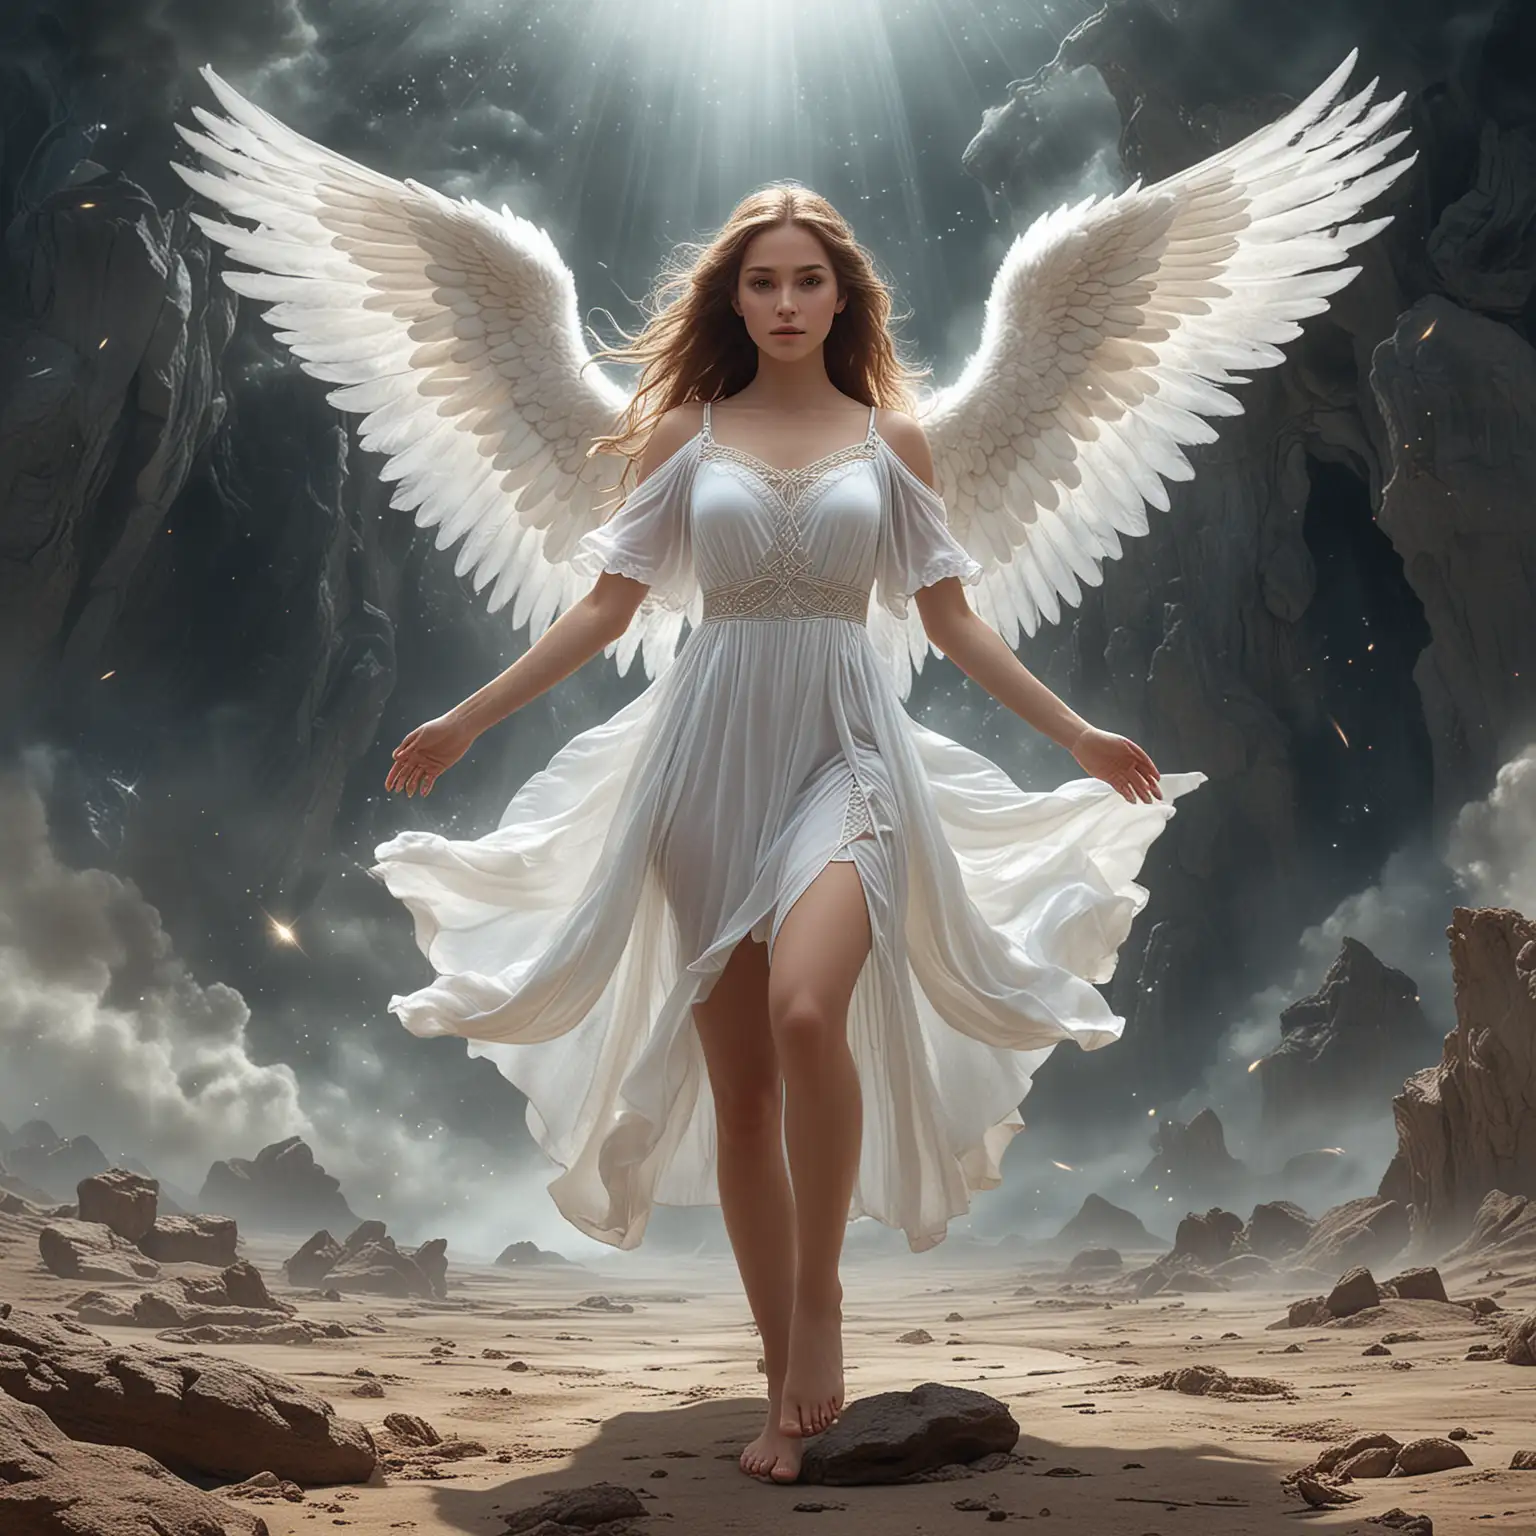 Ethereal Guardian Female Angel Hovering in Mysterious Inner Earth